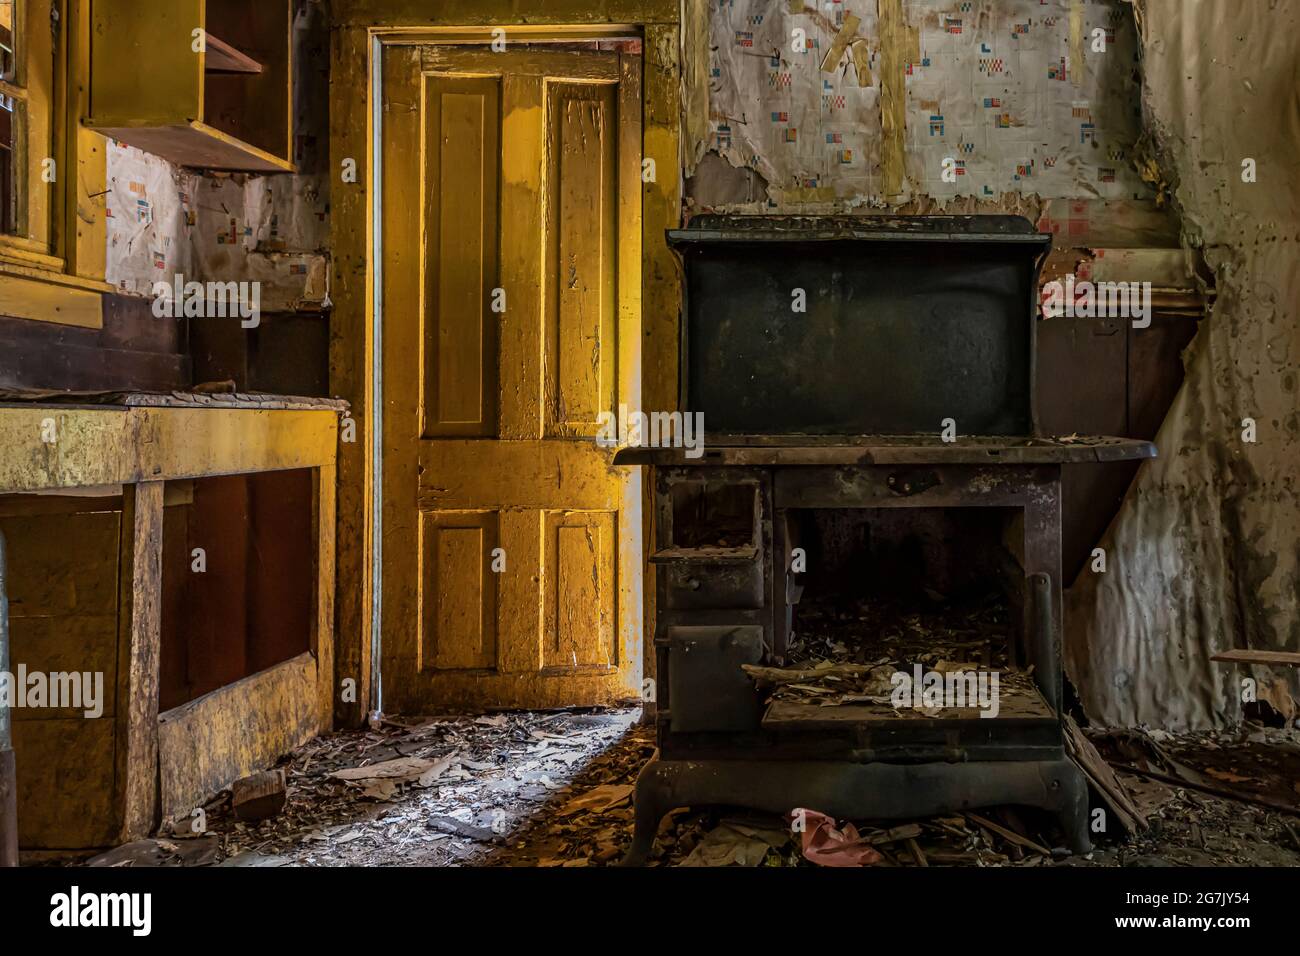 Yellow door and old stove inside old house in Garnet ghost town, a town once home to gold miners and their families, Montana, USA Stock Photo